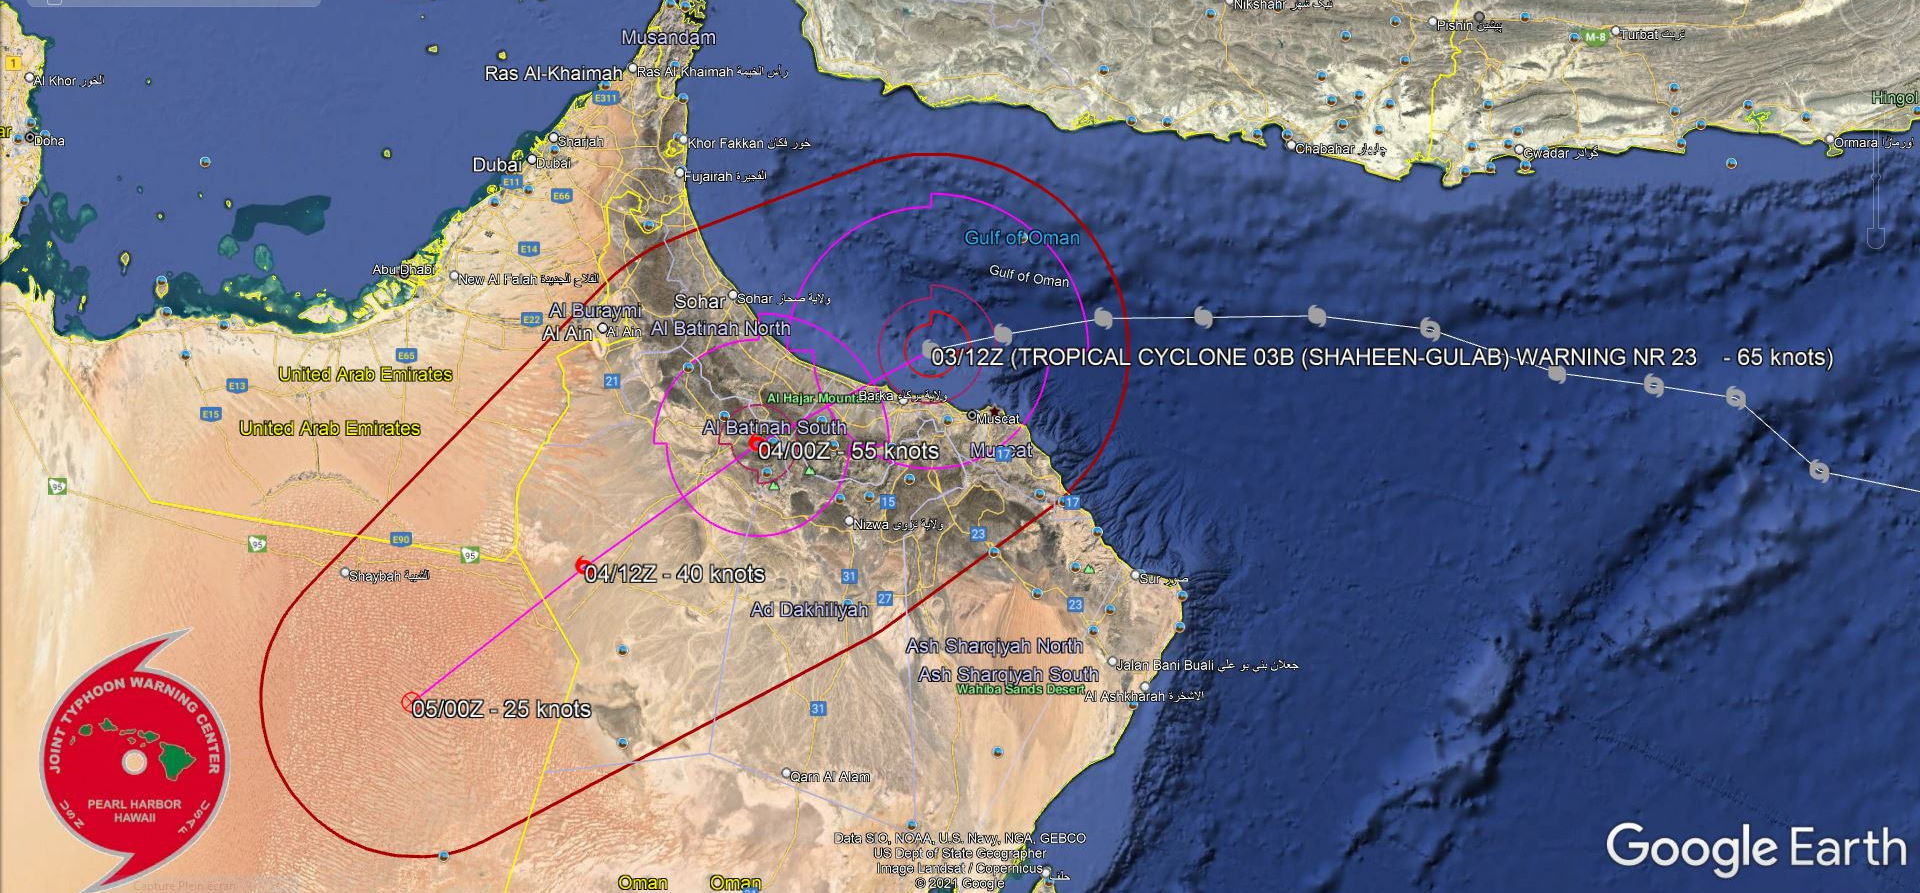 FORECAST REASONING.  SIGNIFICANT FORECAST CHANGES: THERE ARE NO SIGNIFICANT CHANGES TO THE FORECAST FROM THE PREVIOUS WARNING.  FORECAST DISCUSSION: TC 03B WILL TRACK WEST-SOUTHWESTWARD THROUGH THE DURATION OF THE FORECAST. SOME MESOSCALE VARIATION IN TRACK IS EXPECTED AS THE SYSTEM MOVES AROUND THE HIGHER TERRAIN WEST OF MUSCAT, BUT OTHERWISE THE TRACK SHOULD TAKE THE SYSTEM INTO THE EMPTY QUARTER BY 36H. TC 03B IS EXPECTED TO MAKE LANDFALL WITHIN THE NEXT COUPLE OF HOURS NEAR AL SUWAYQ, OMAN. THE SYSTEM IF FORECAST TO MAINTAIN 65-KNOT/CAT 1 INTENSITY THROUGH LANDFALL, BUT ONCE ASHORE WILL RAPIDLY WEAKEN DUE TO TERRAIN INTERACTION AND ULTIMATELY DISSIPATE OVER THE EMPTY QUARTER BY 36H.